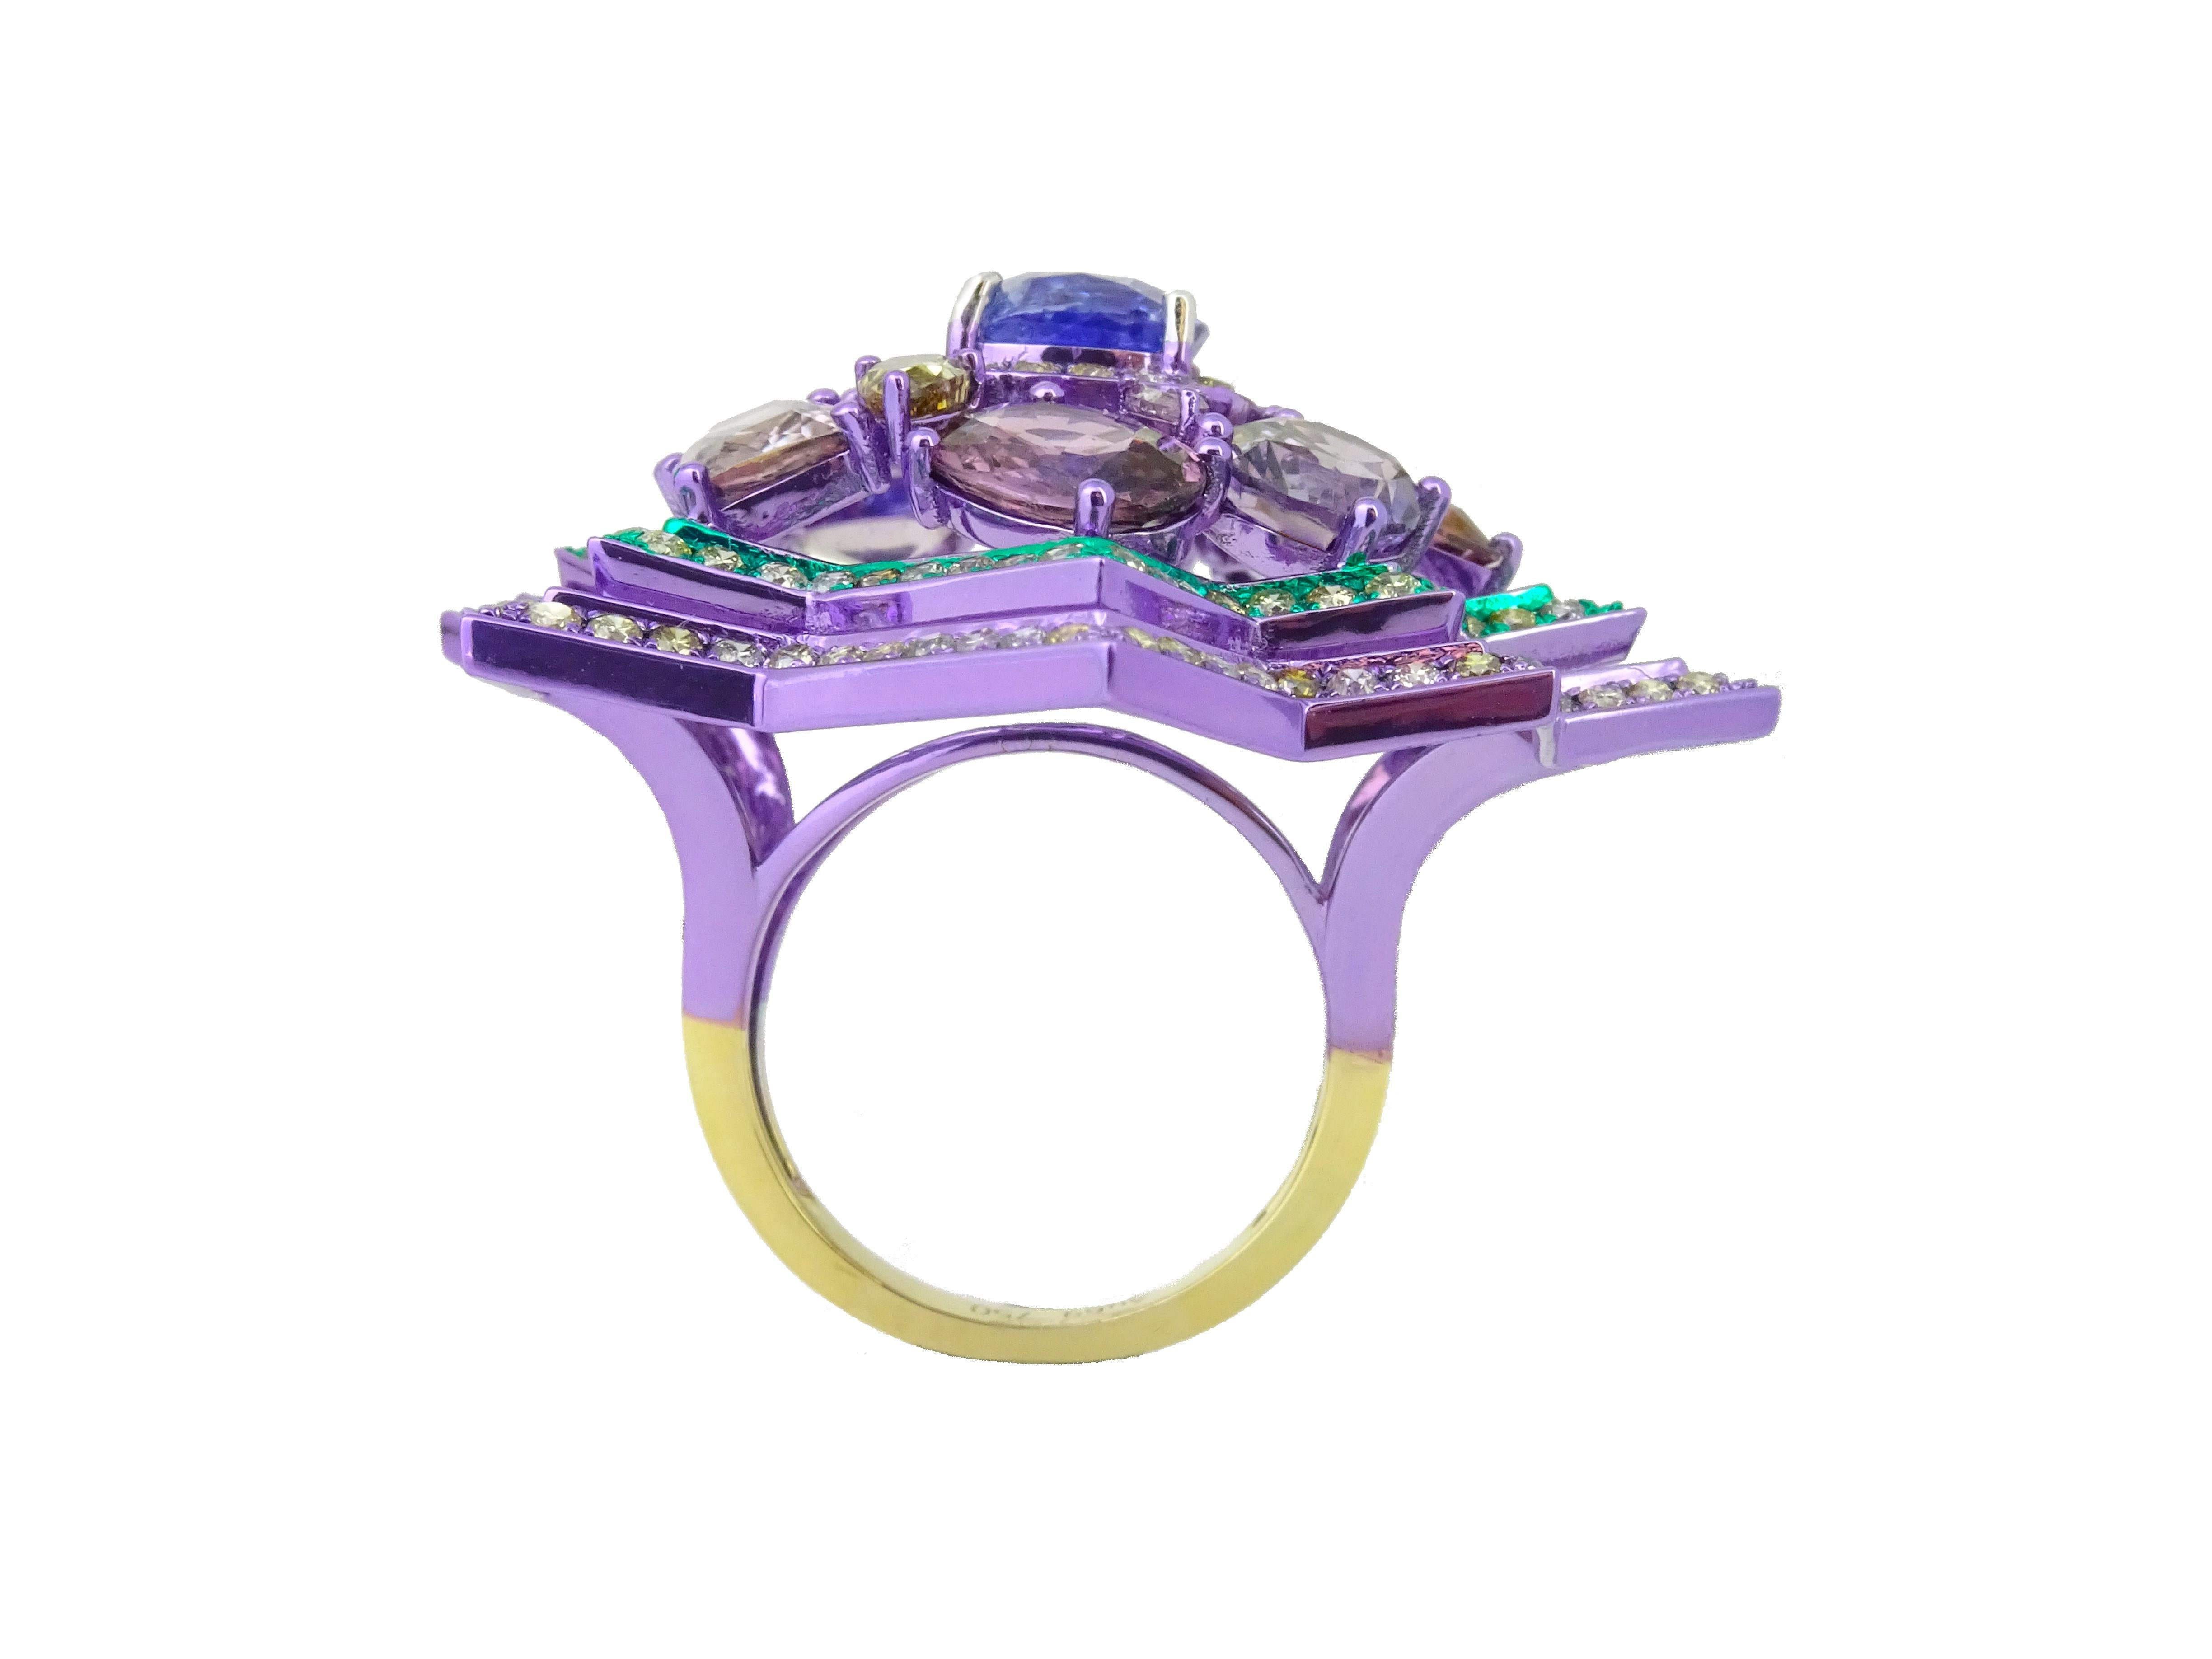 The Pop-Star of Whaam Ring from 'The Poetry of Art Collection' by Austy Lee. This brand new ring is set with Natural Sri Lankan Blue Sapphire, Purple Sapphires and Diamonds on green and purple-color plated 18K Yellow Gold.

Product Details:
Diamond